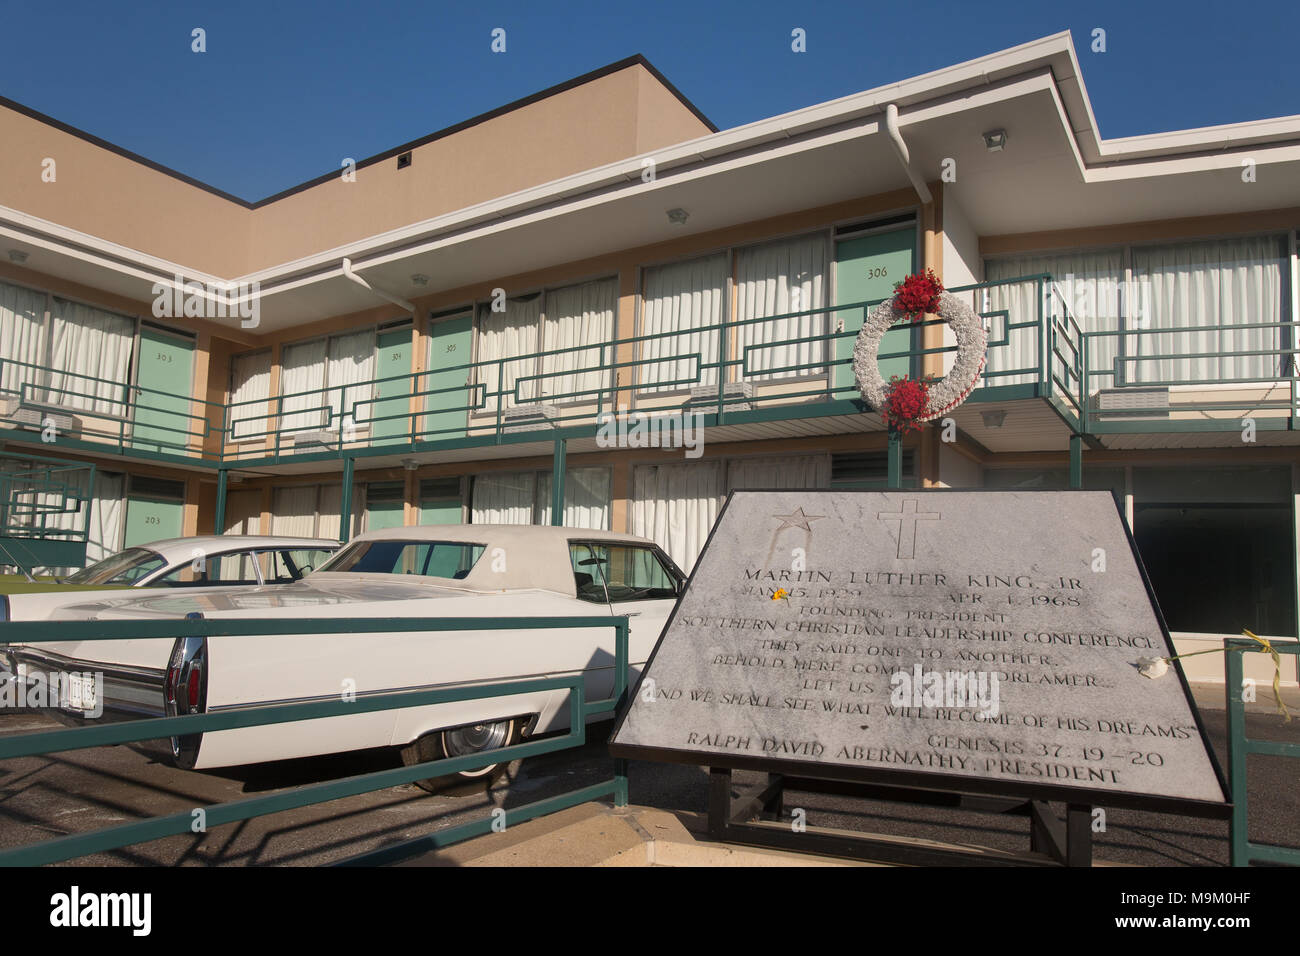 National Civil Rights Museum located in the old Lorraine Motel, site of the Martin Luther King, Jr assassination, in Memphis, Tennessee. Stock Photo